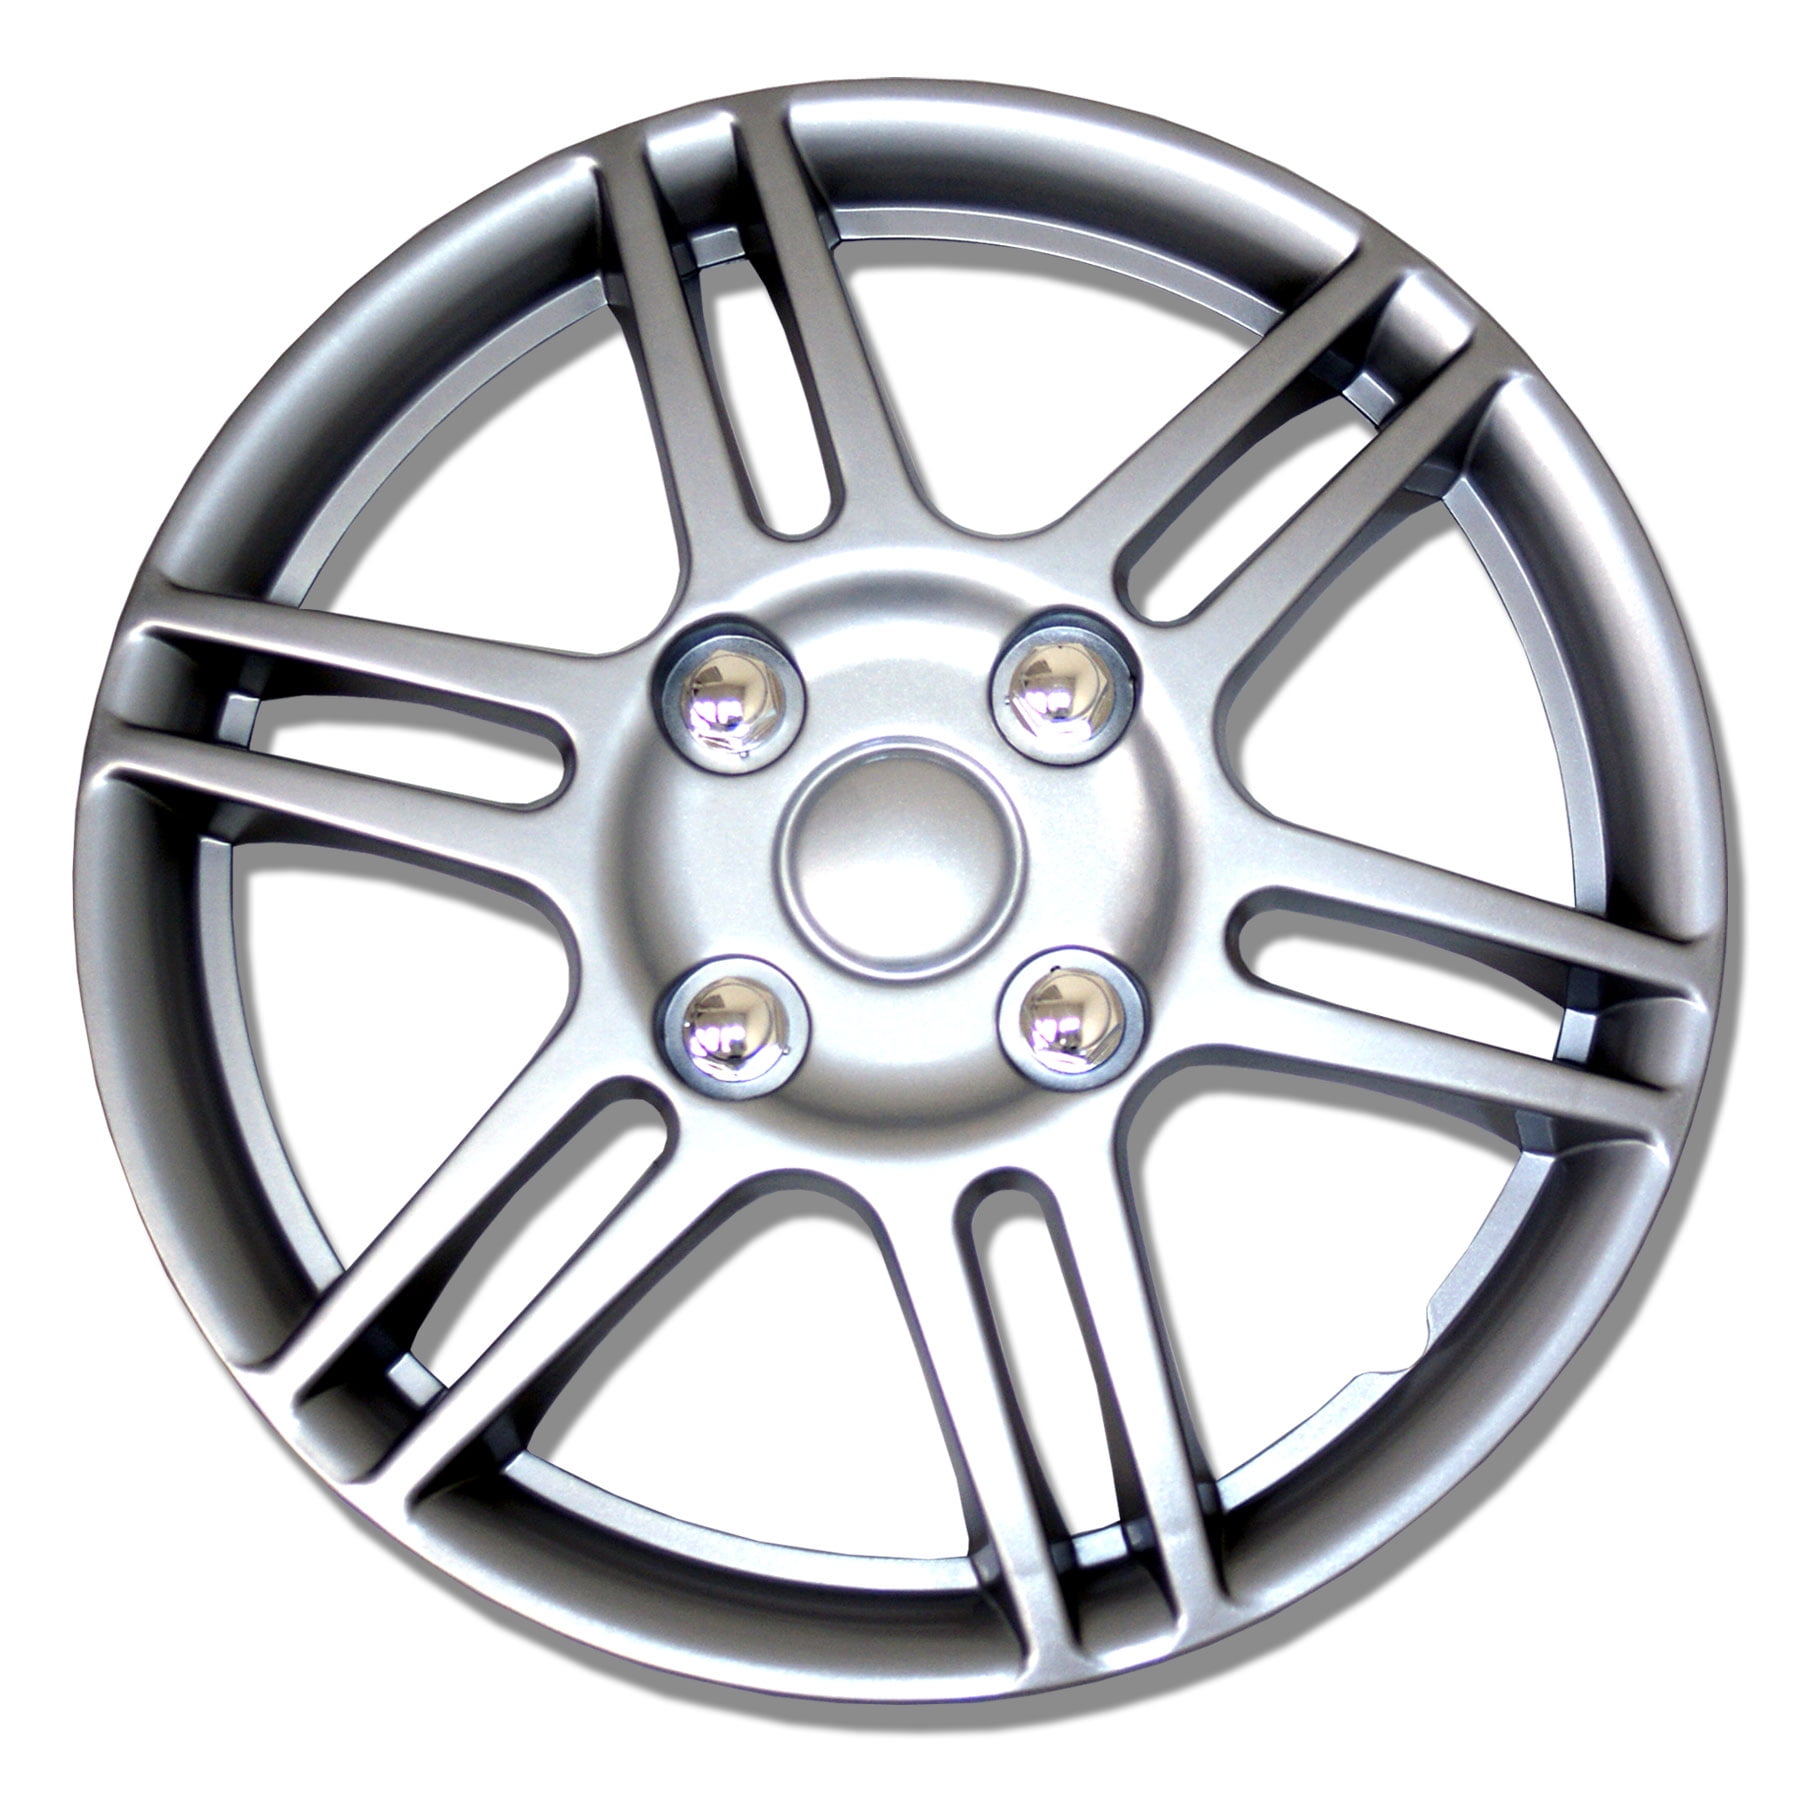 TuningPros WC-14-2009-S 14-Inches-Silver Improved Hubcaps Wheel Skin Cover Set of 4 